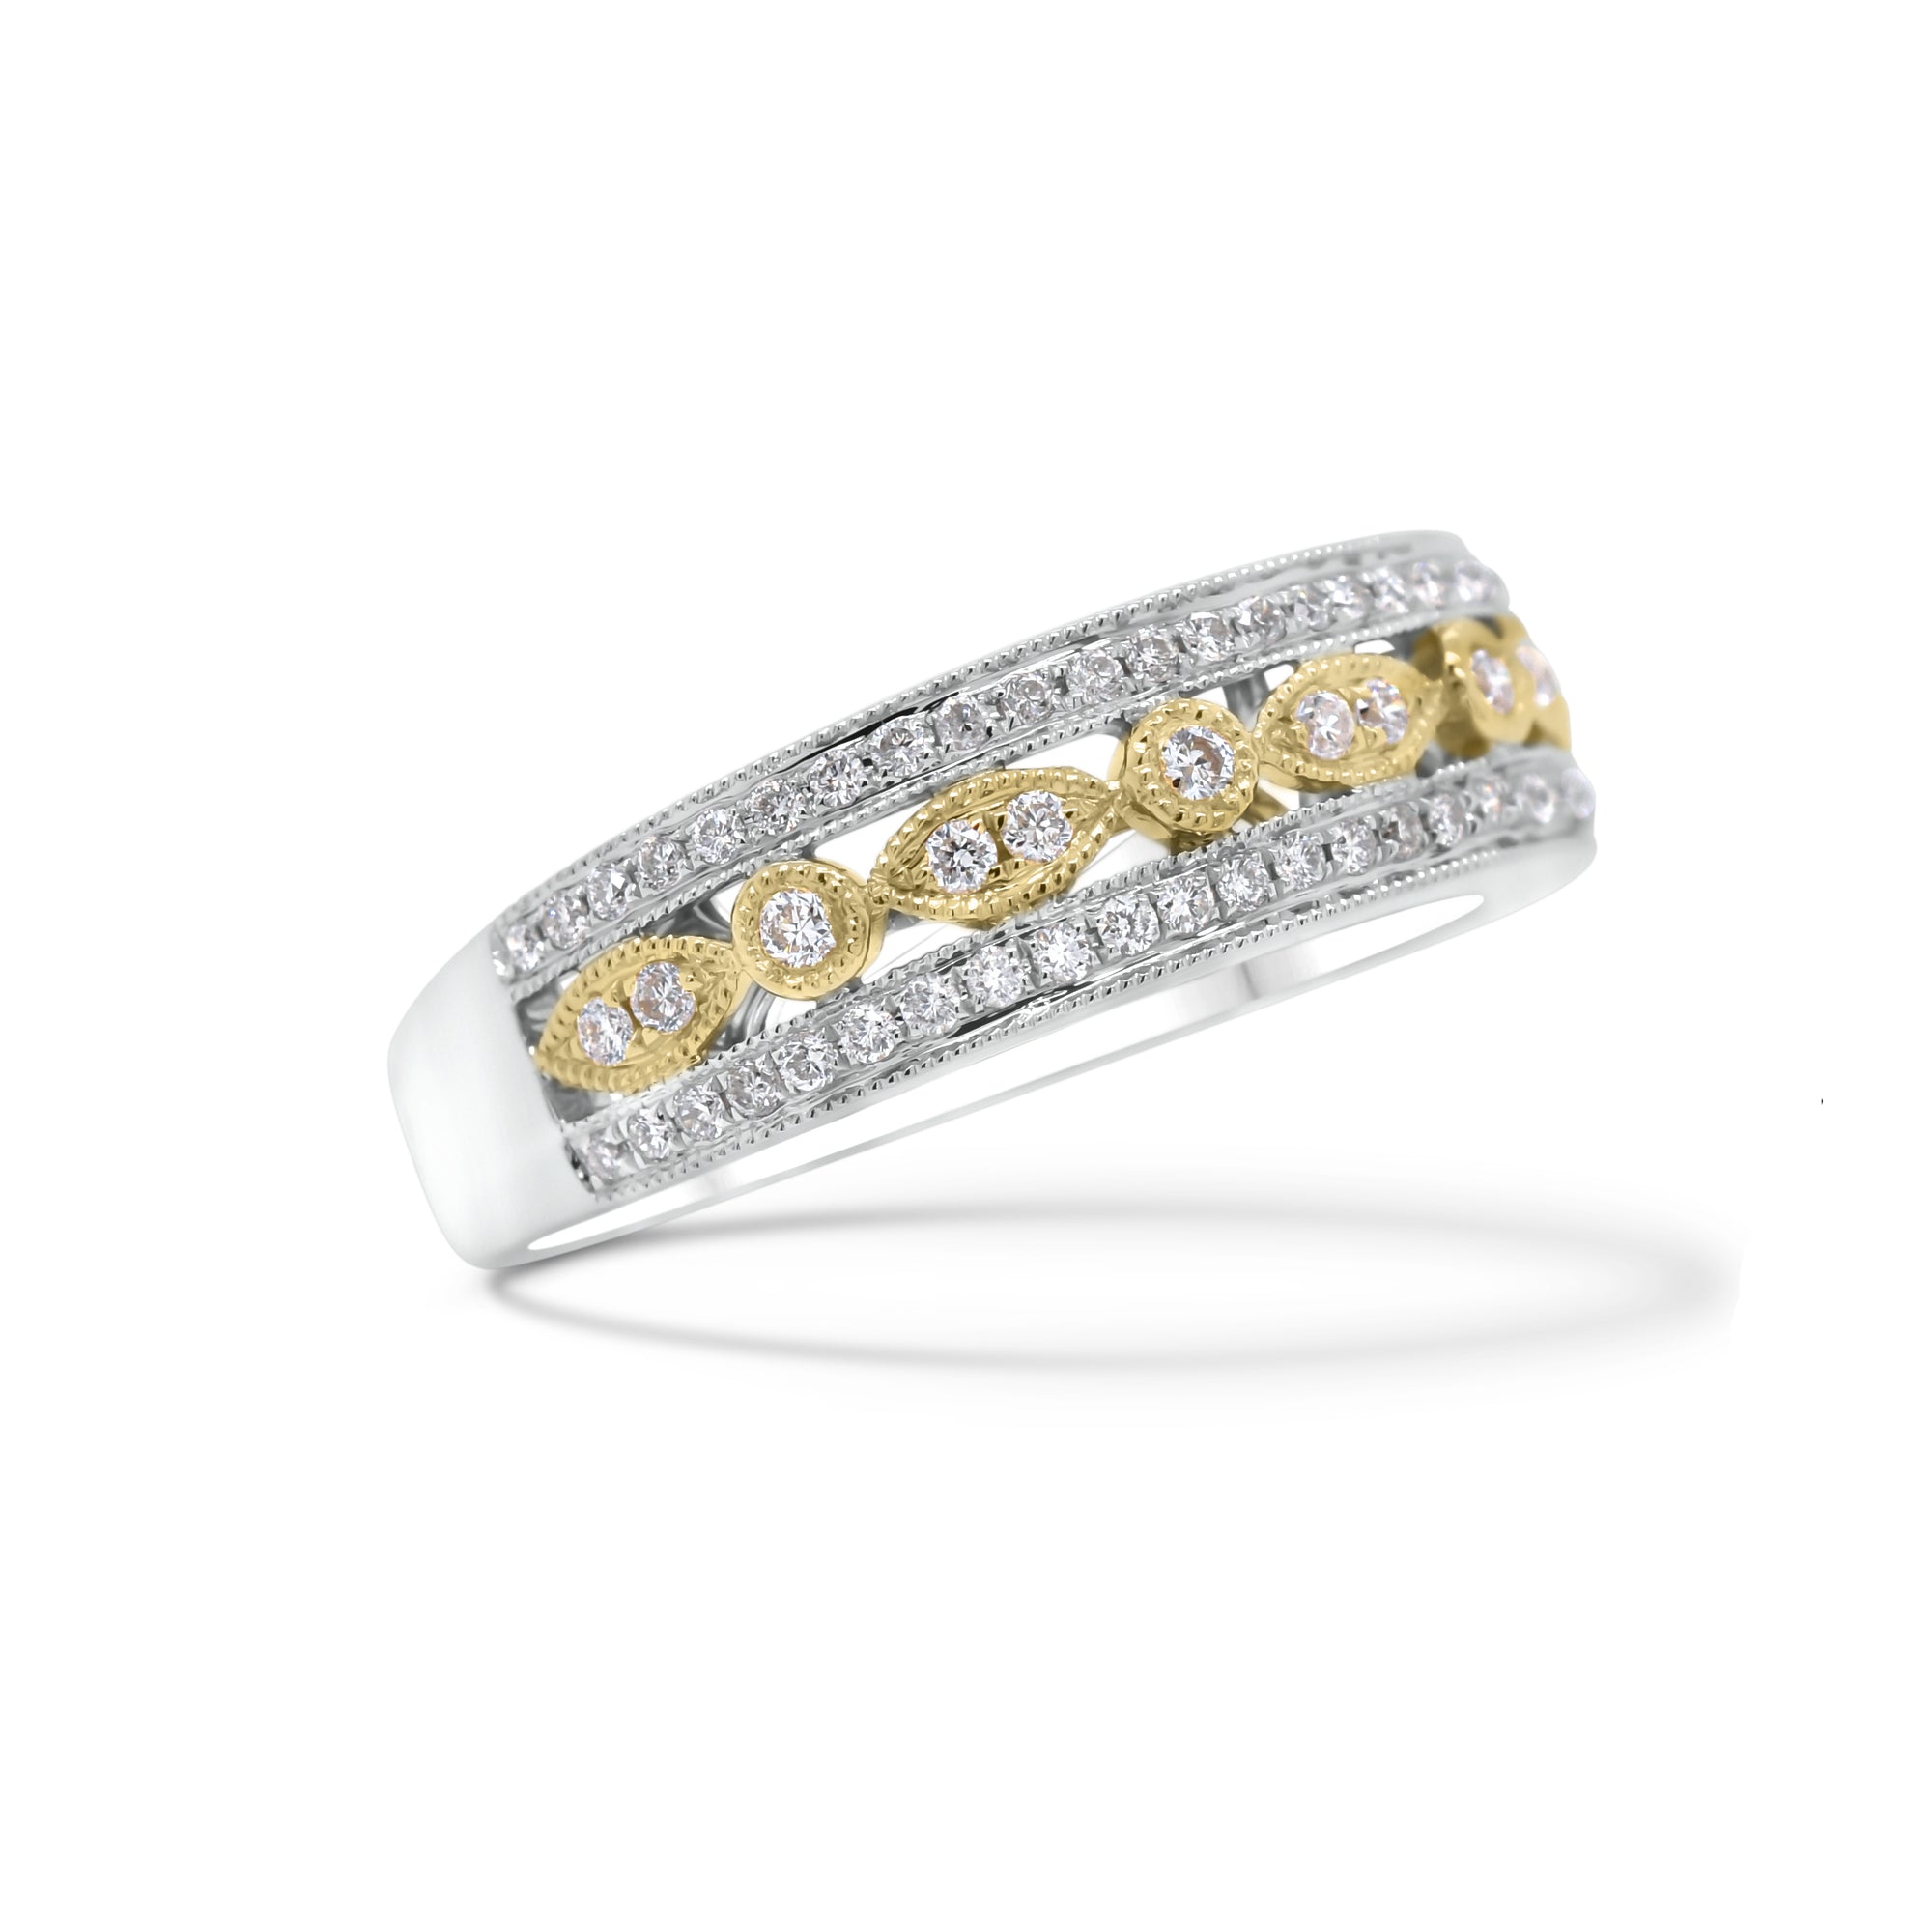 Diamond Shapes Two-Tone Ring  - 18K gold weighing 5.52 grams  - 72 round diamonds totaling 0.33 carats